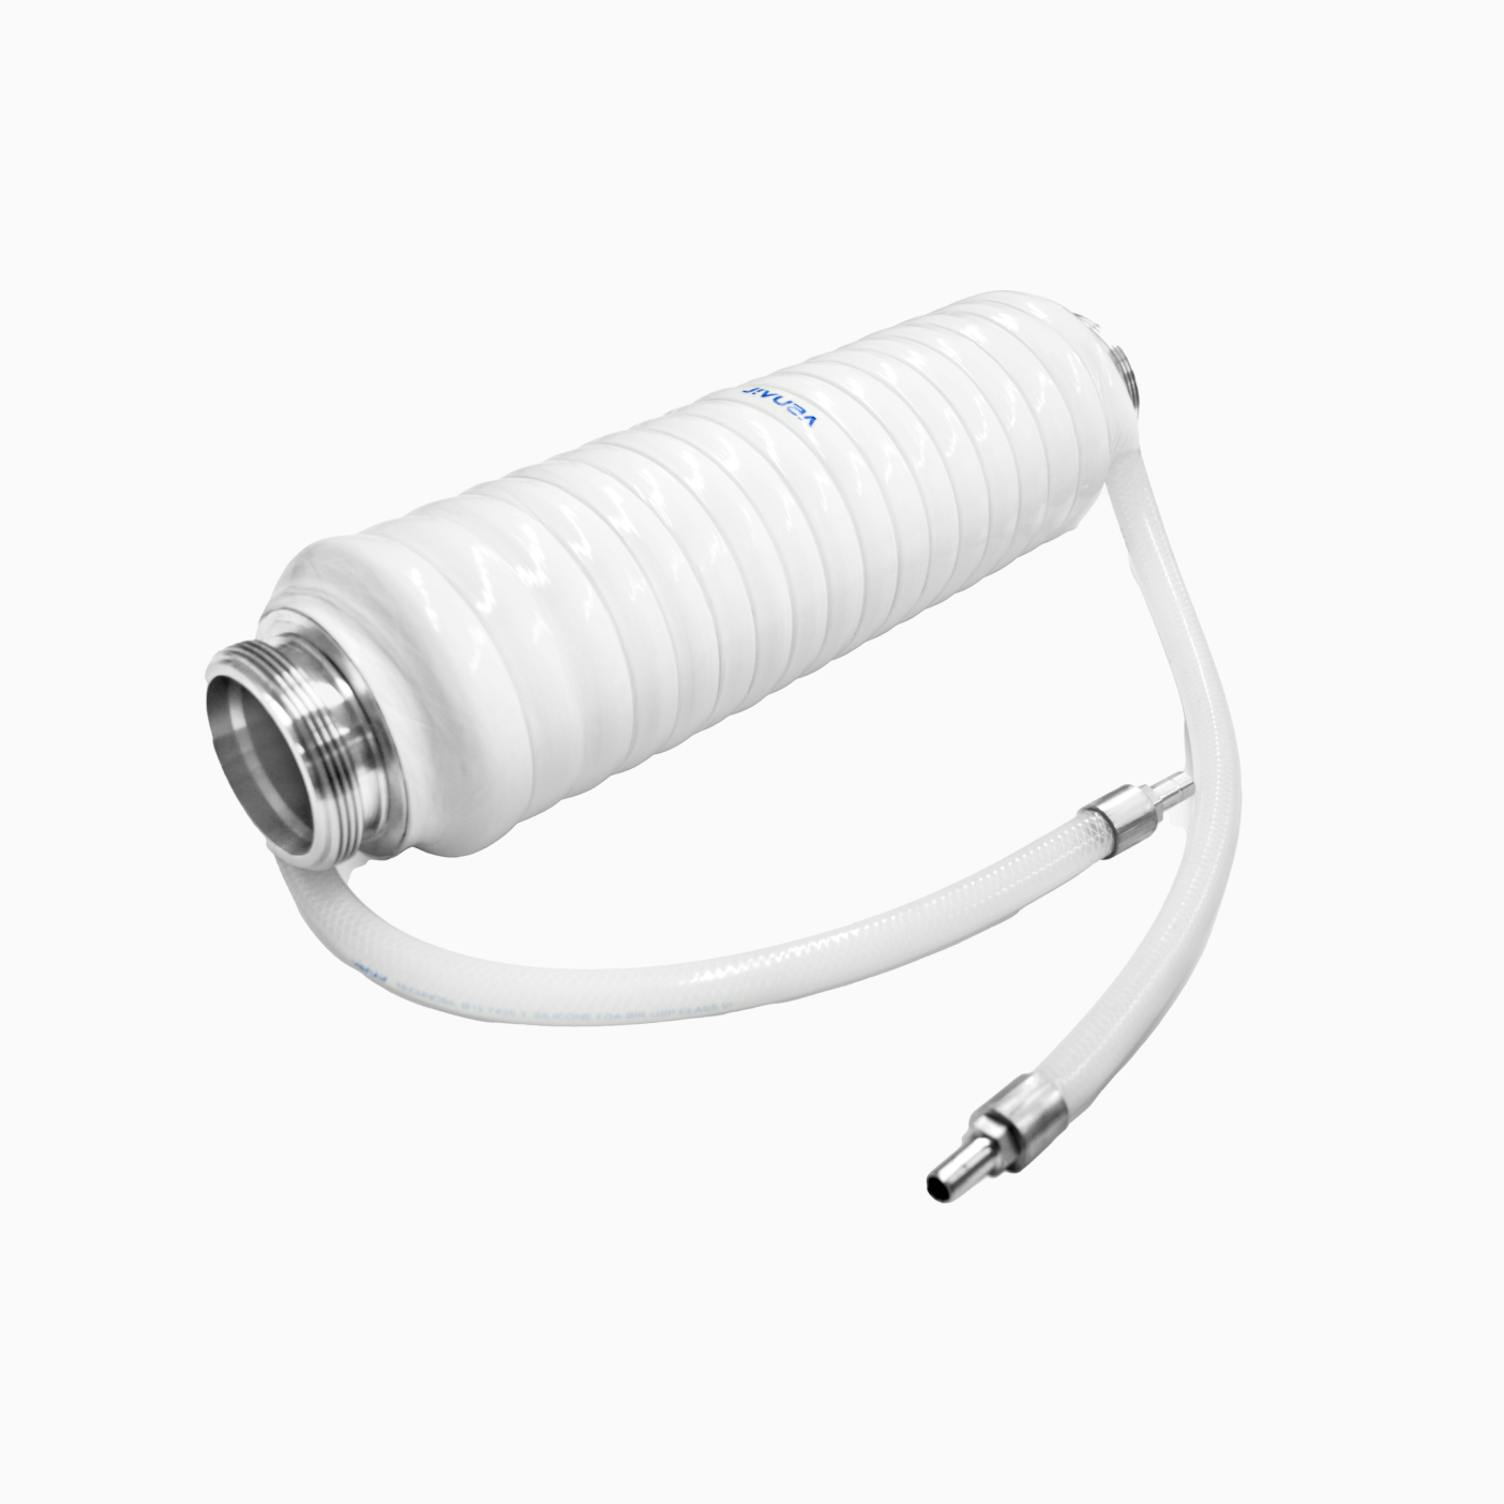 Cooling silicone hose